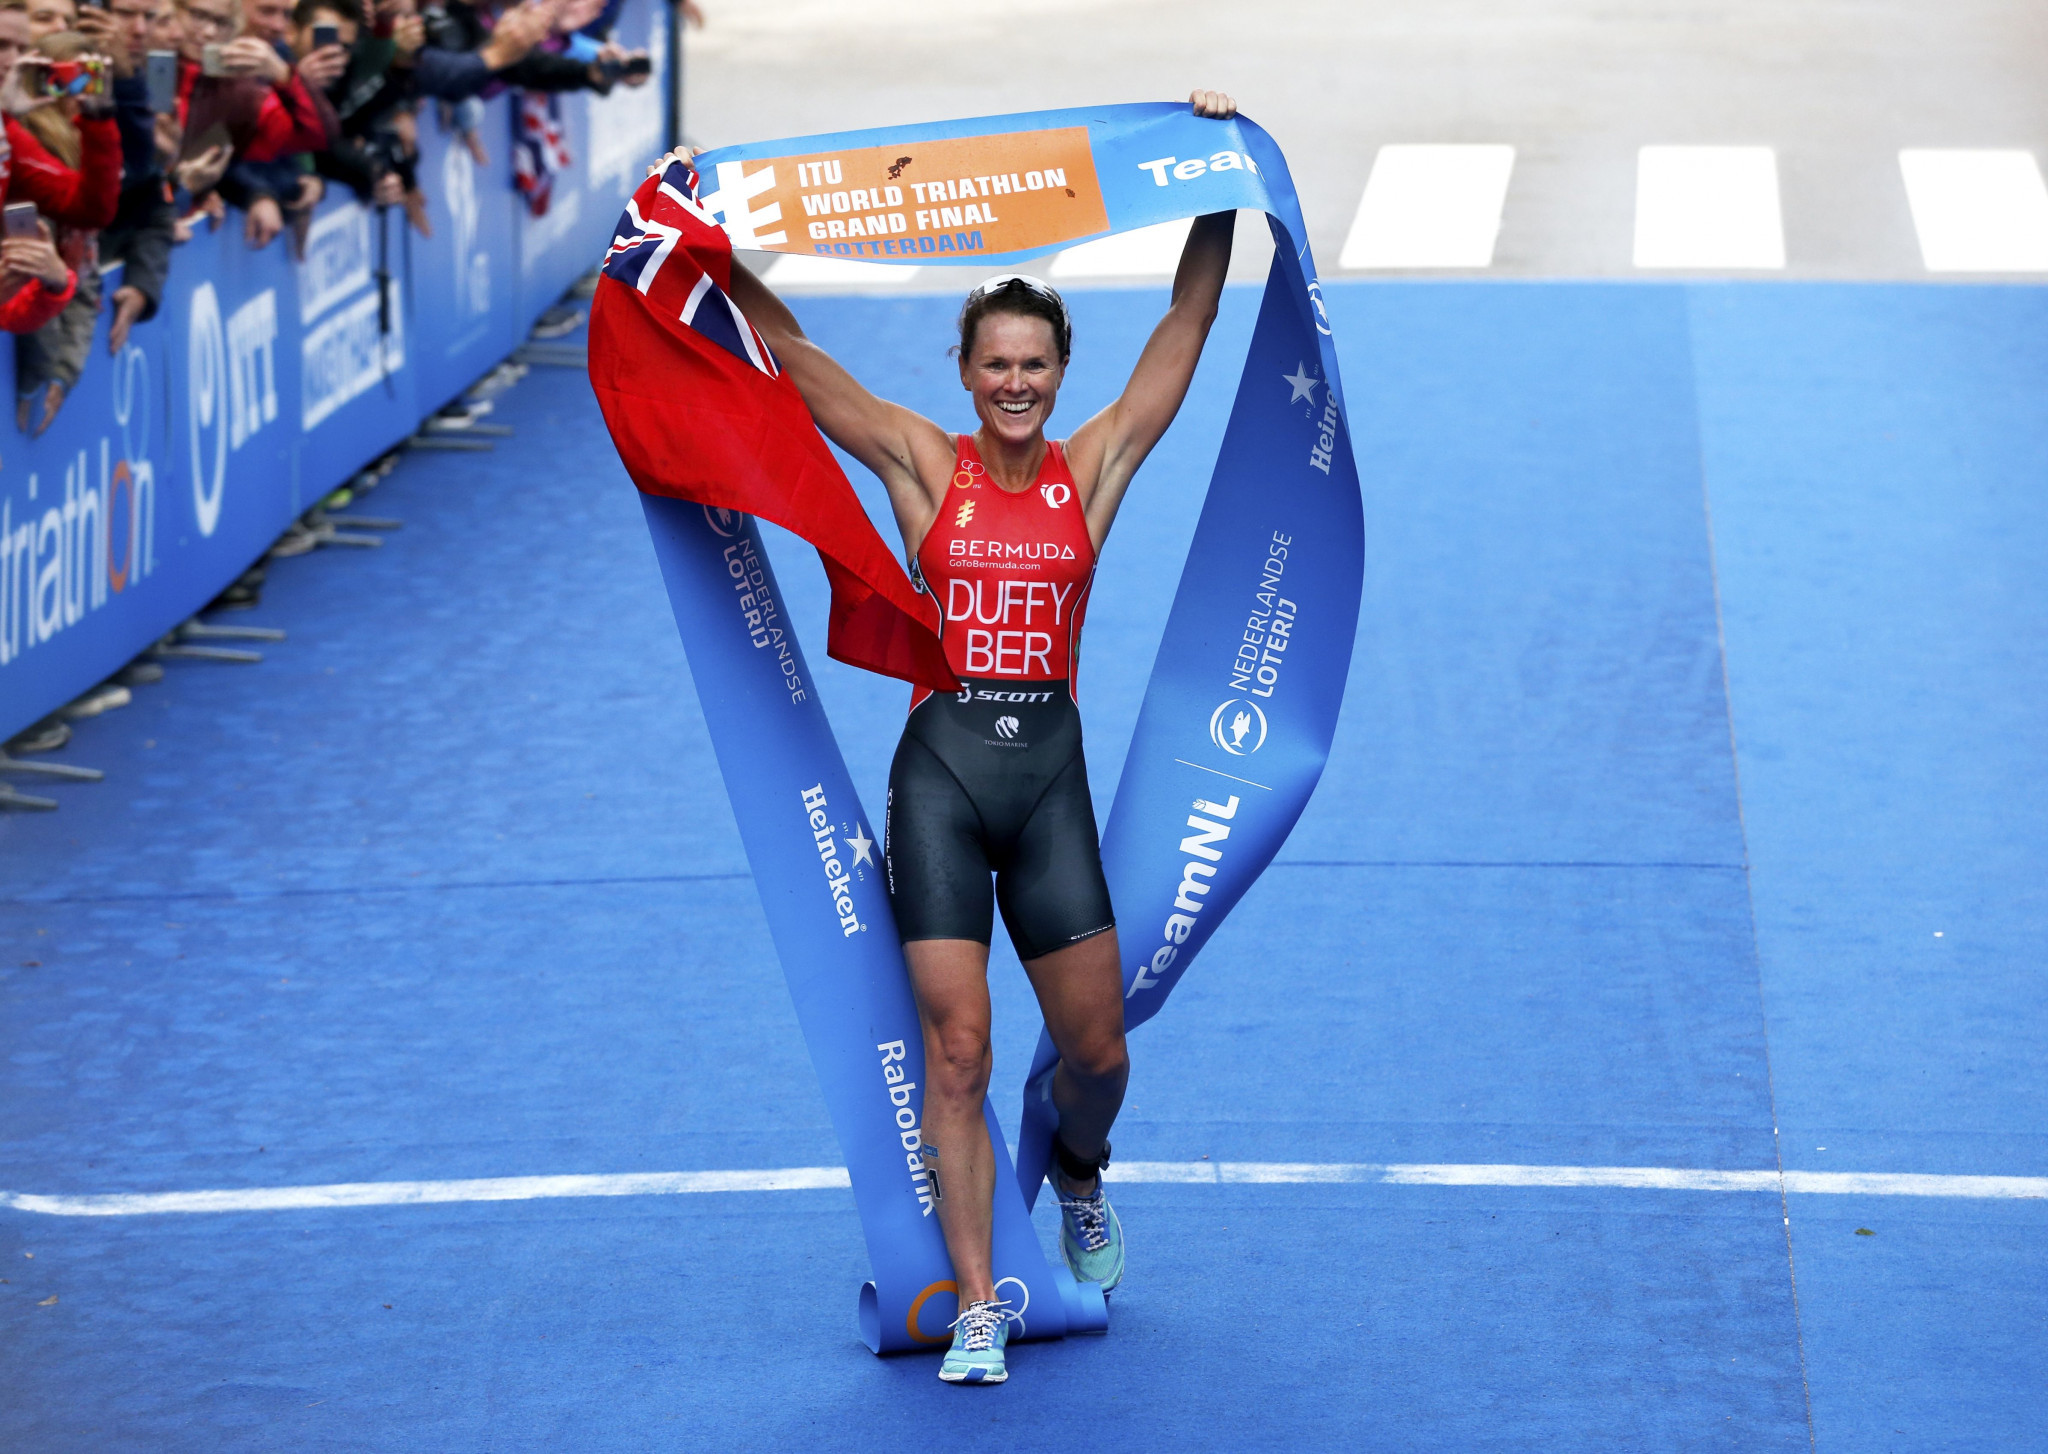 Flora Duffy celebrates retaining her world triathlon title at the Rotterdam Grand Final ©Getty Images